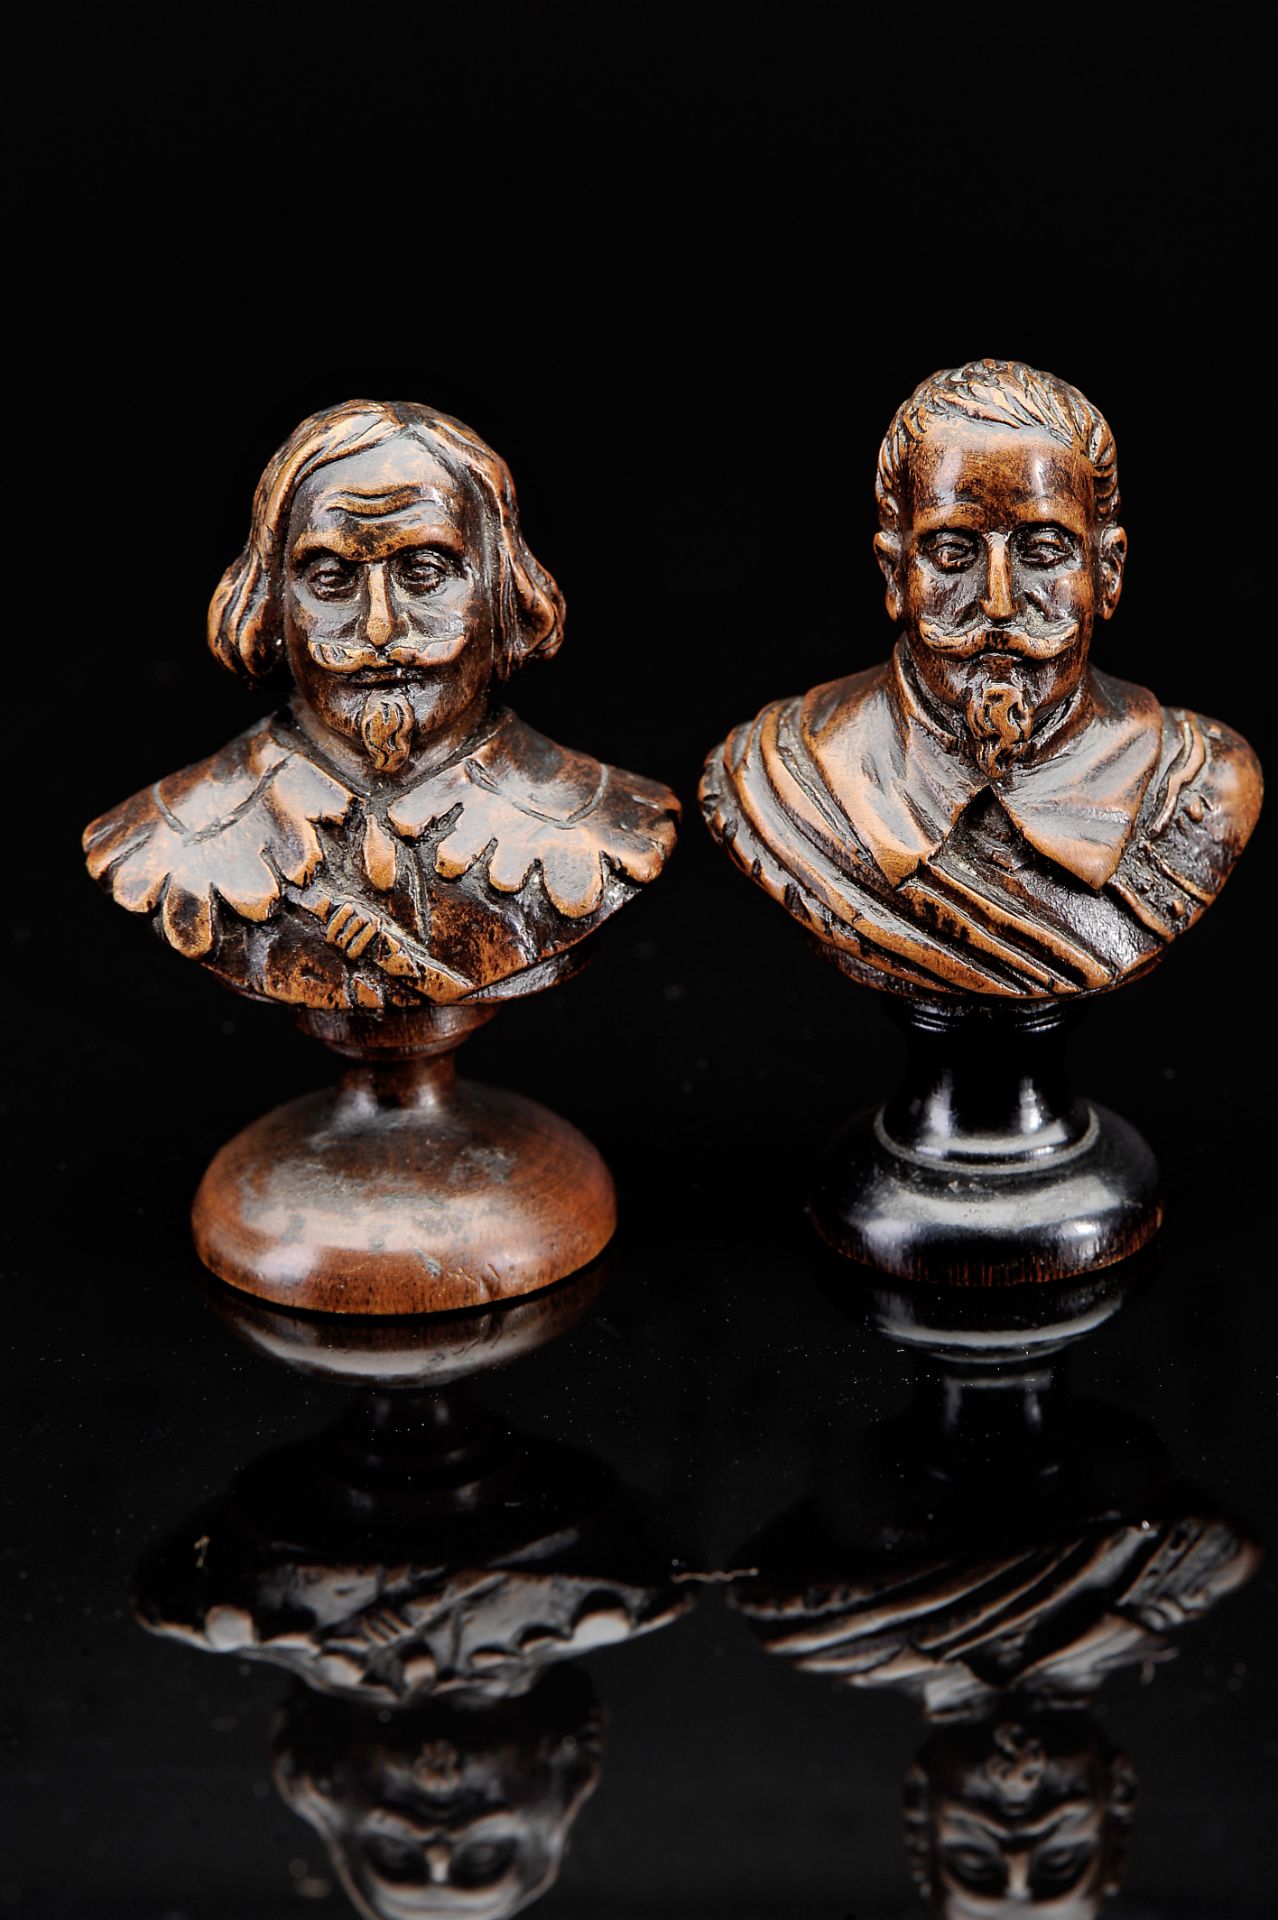 Game pieces - Busts of noblemen